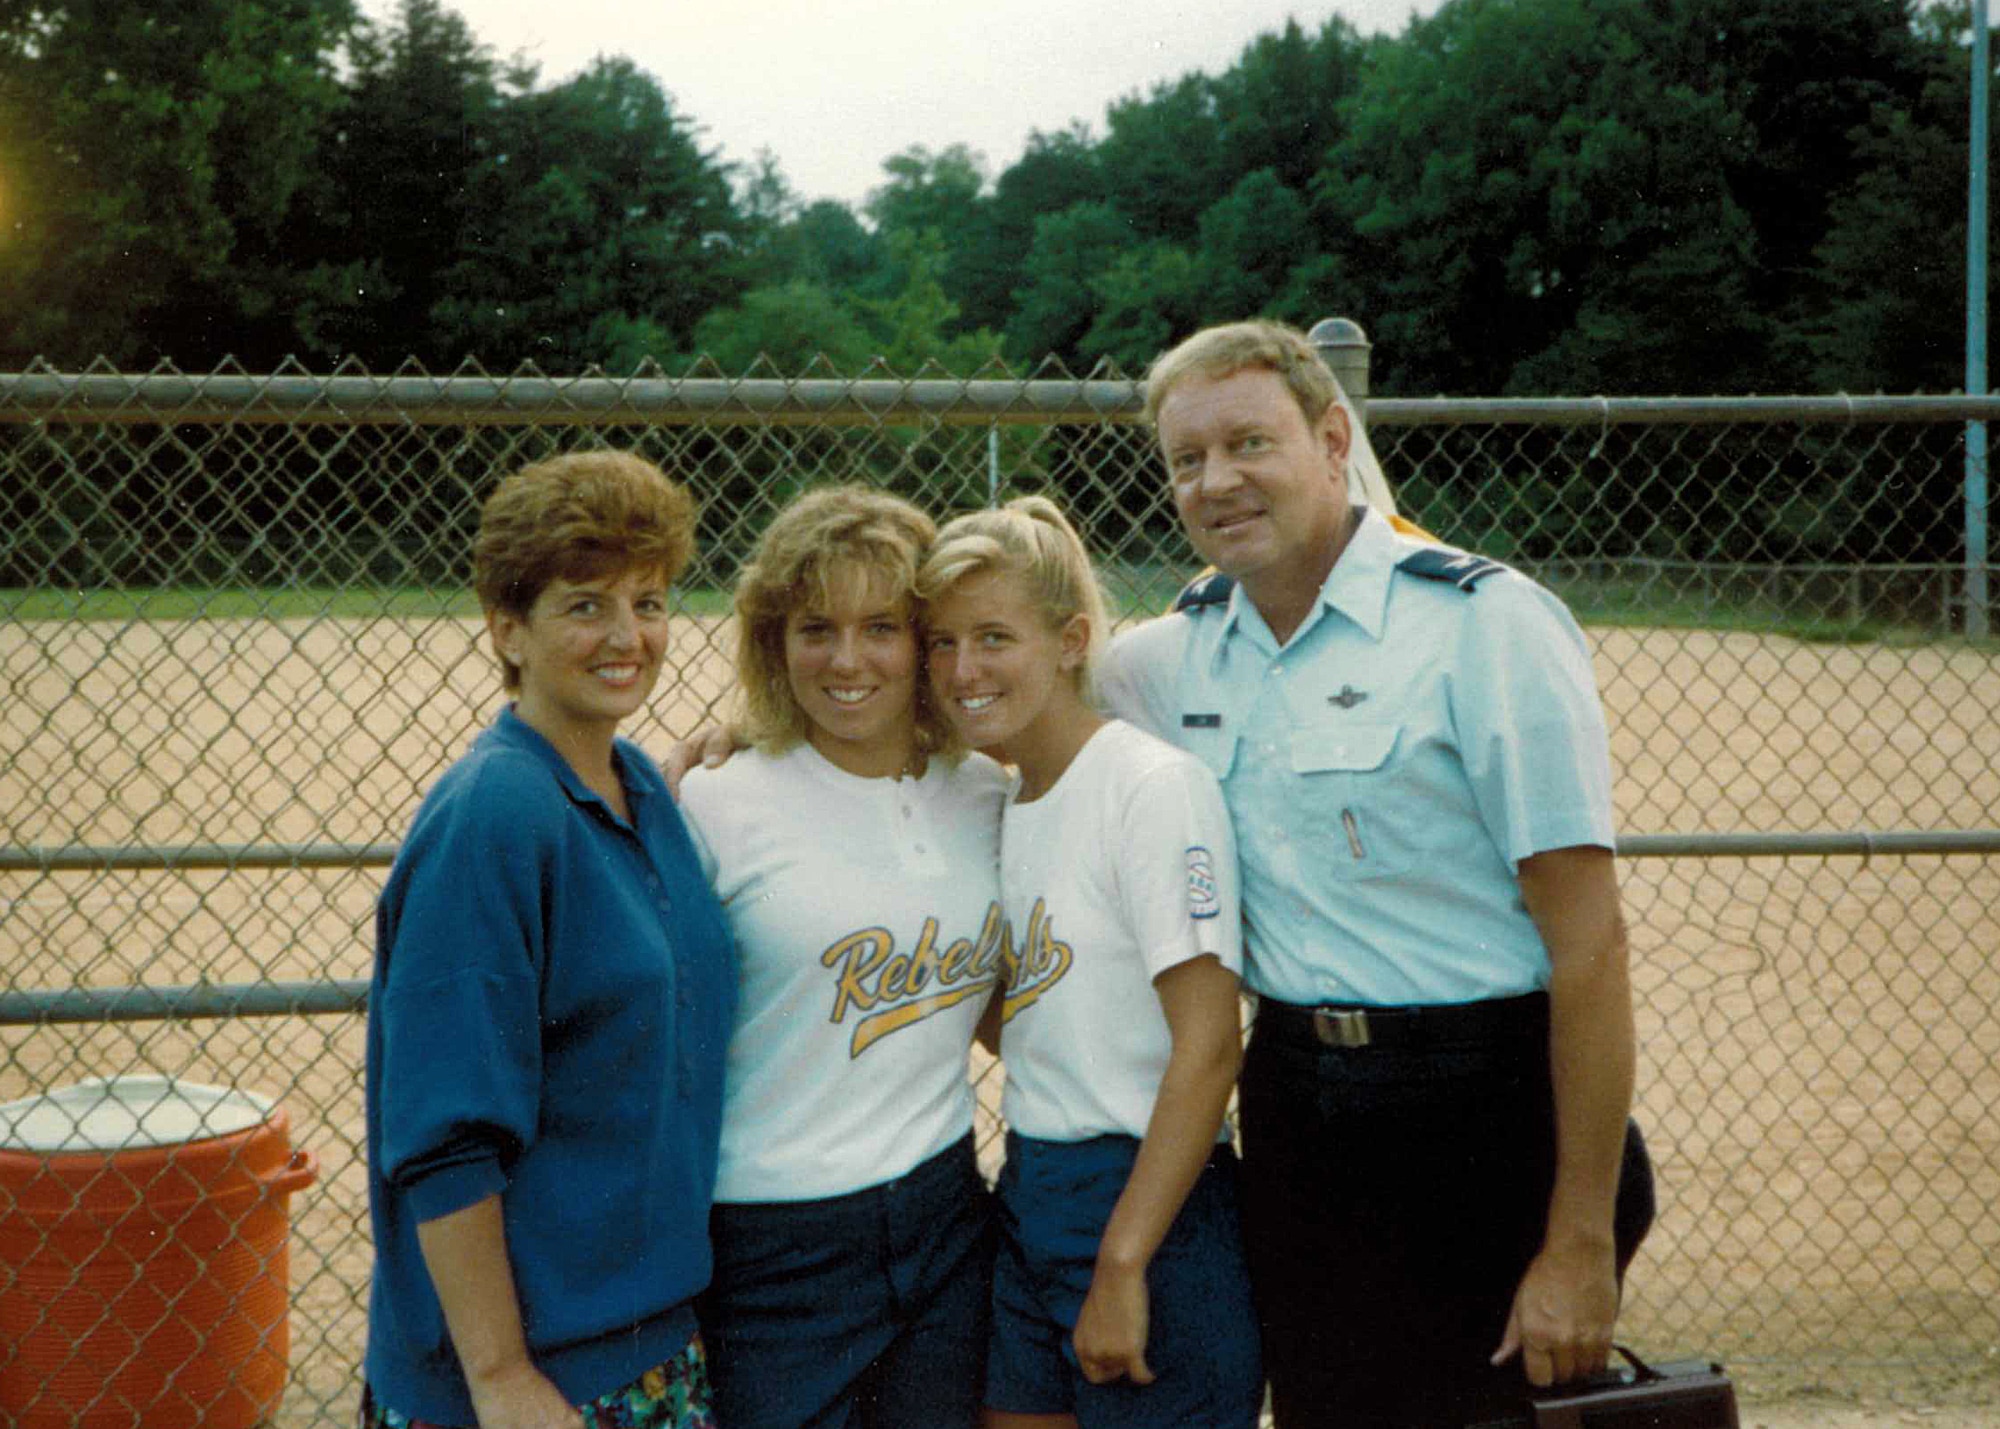 Col. Laura Lenderman, with her mom, Marilou, dad, Col. Gordon Cook, and sister Kristin Cook. Now the 375th Air Mobility Wing commander, Lenderman said her love of sports were framed at Scott Air Force Base, Illinois, when her father was stationed there in the early 1980s. (Courtesy photo)